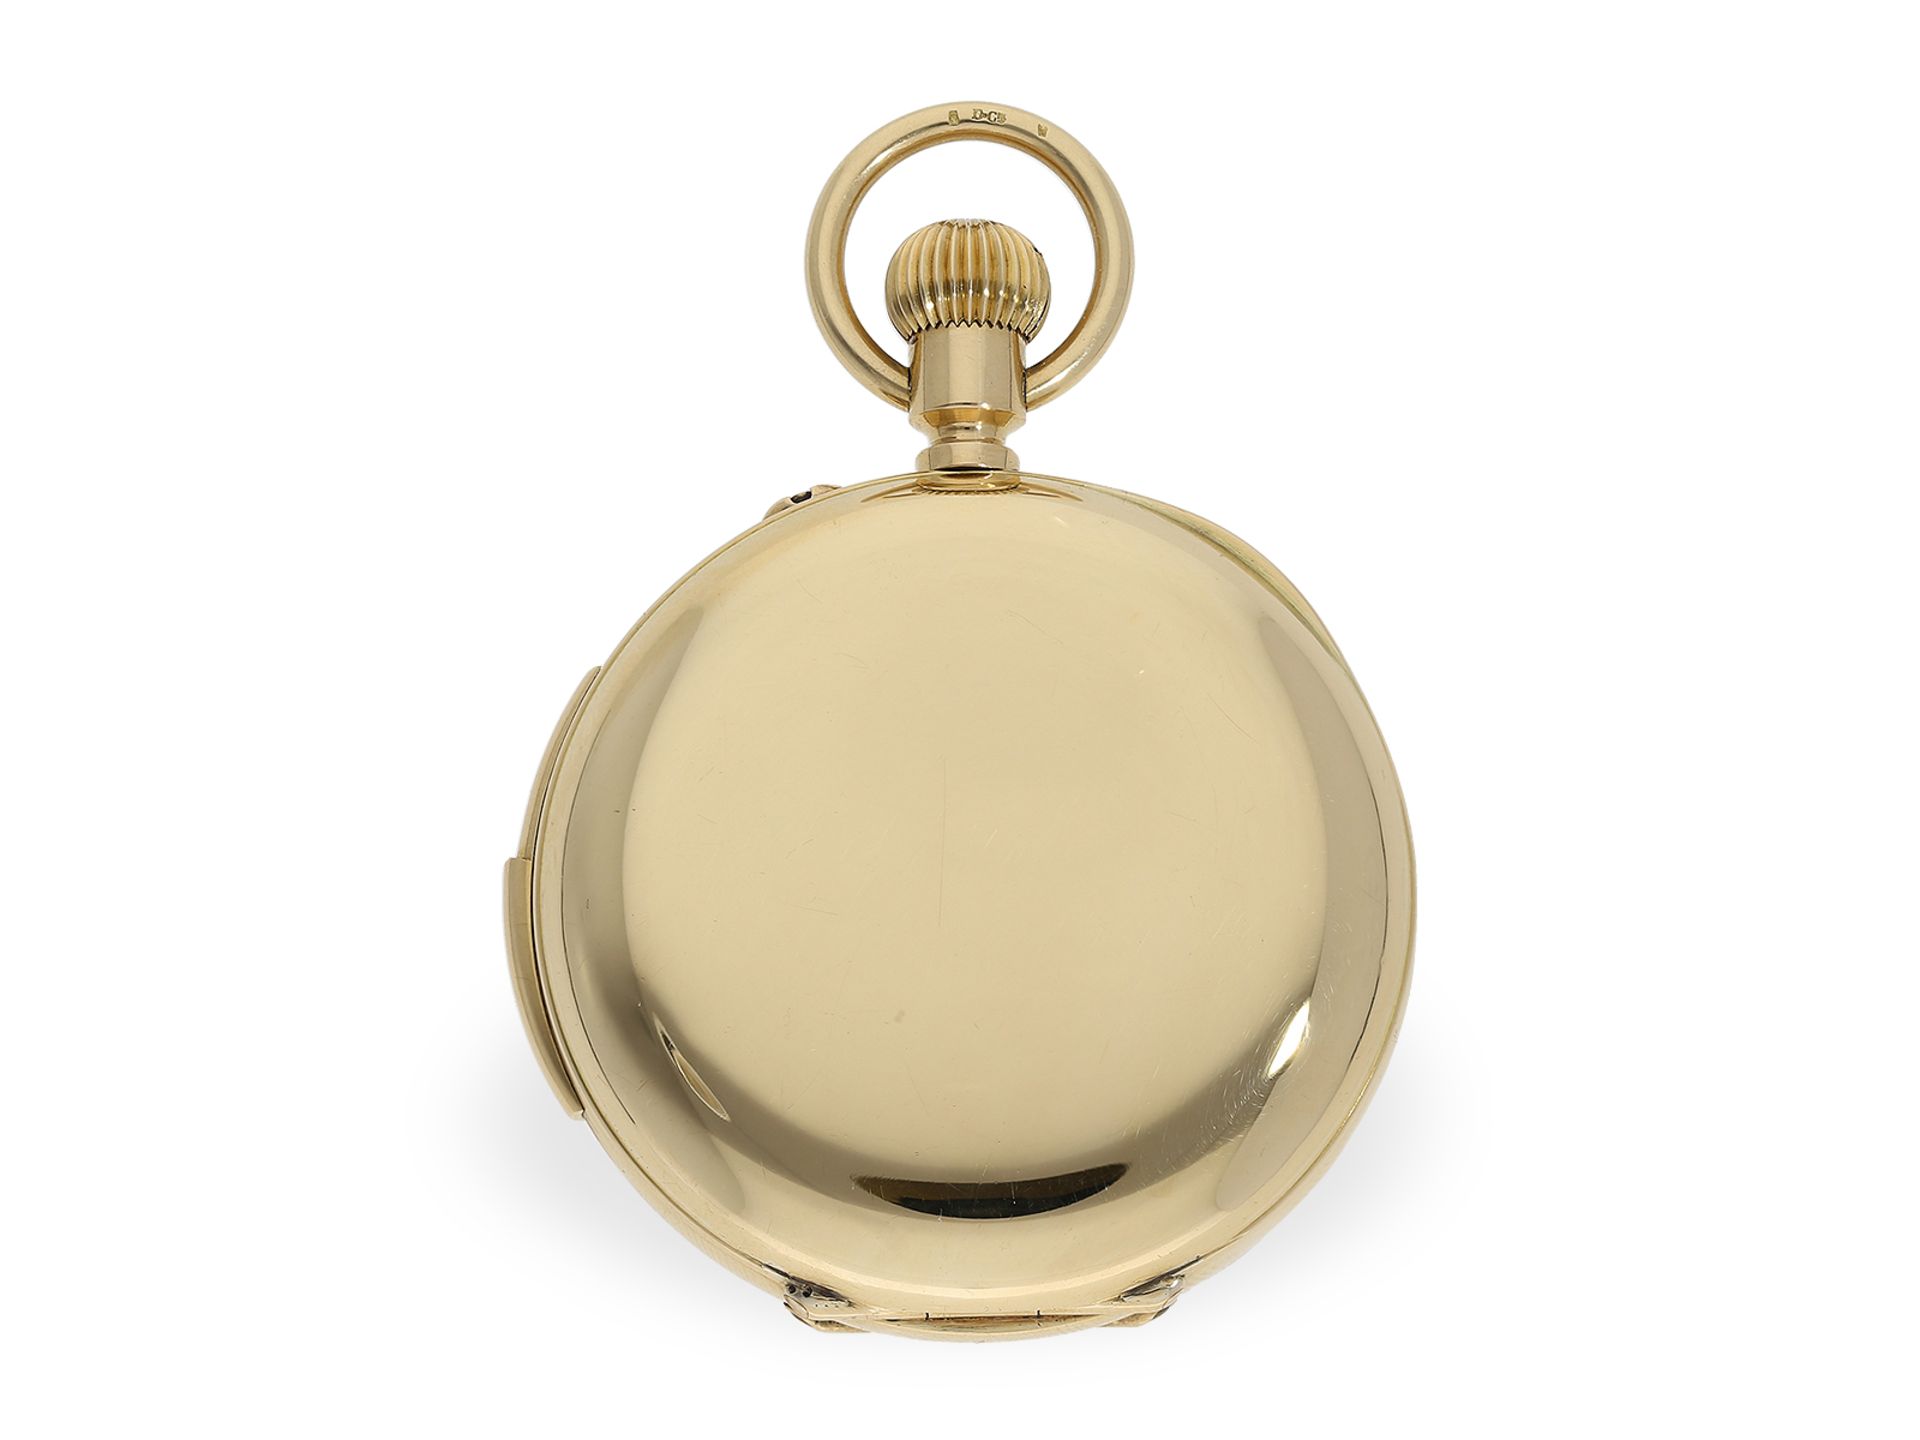 Pocket watch: heavy gold hunting case watch with minute repeater, Le Roy London No.1371 - Image 6 of 7